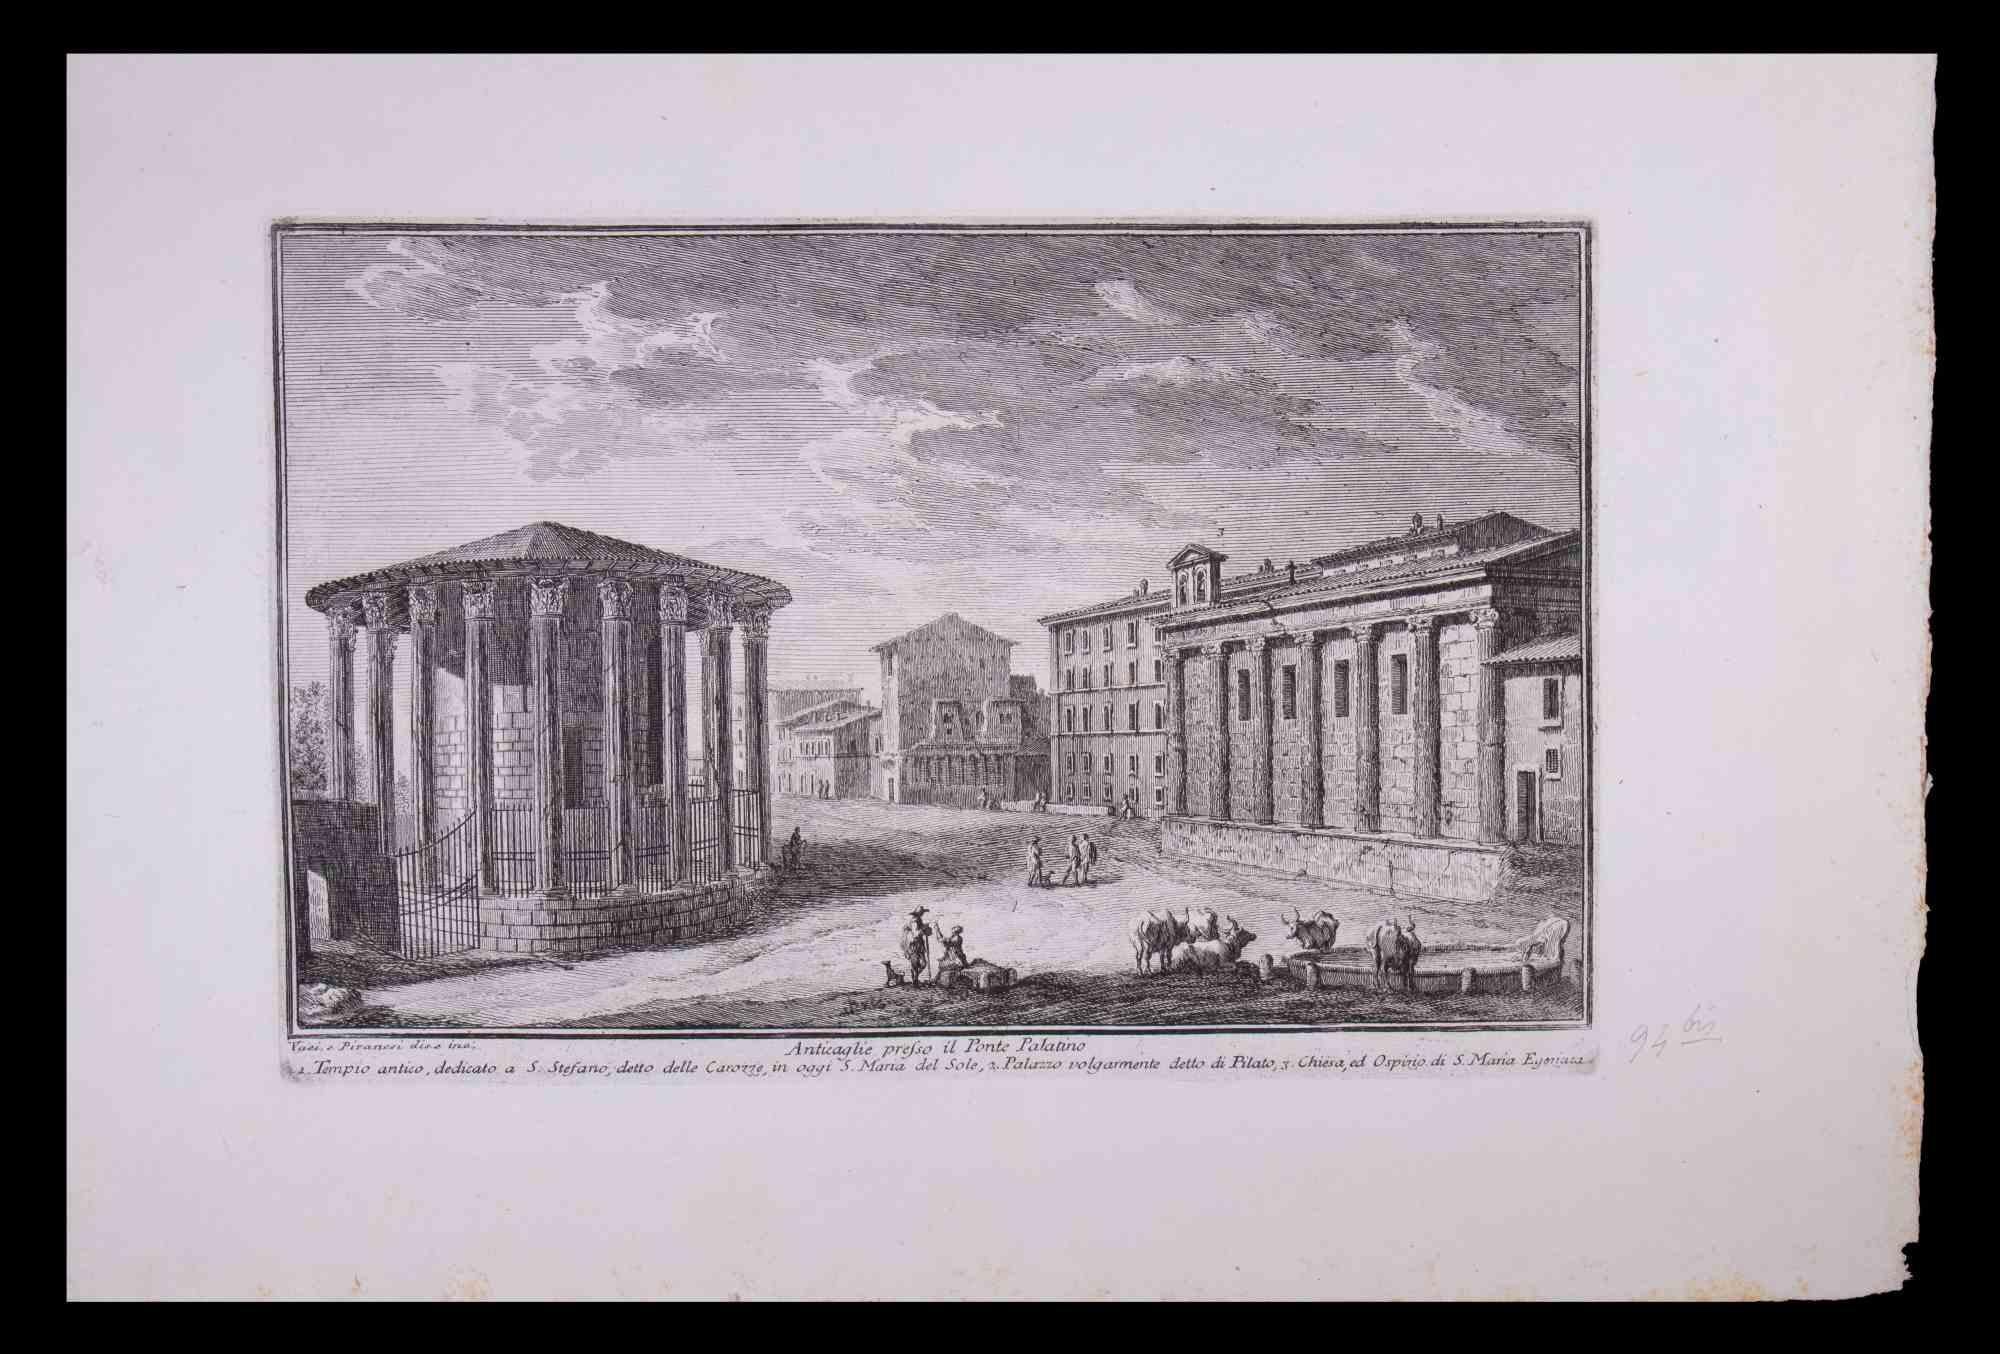 Il Ponte Palatino is an original black and white etching of the Late 18th century realized by Giuseppe Vasi.

Signed and titled on plate lower margin. 

Good conditions and aged margins.

Giuseppe Vasi  (Corleone,1710 - Rome, 1782) was an engraver,